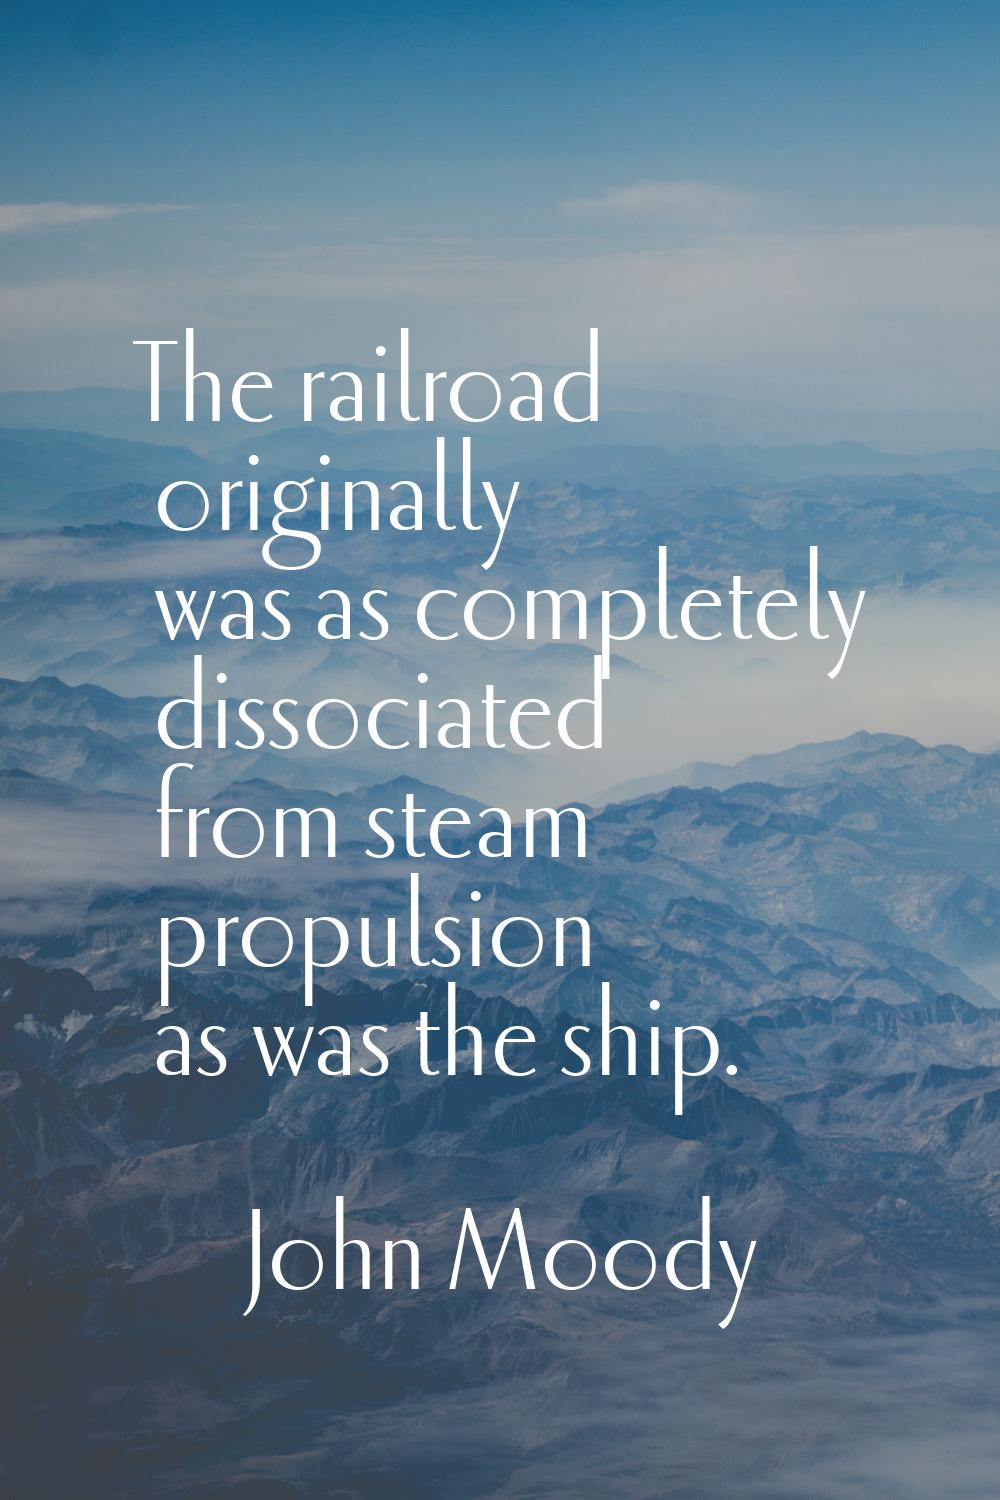 The railroad originally was as completely dissociated from steam propulsion as was the ship.